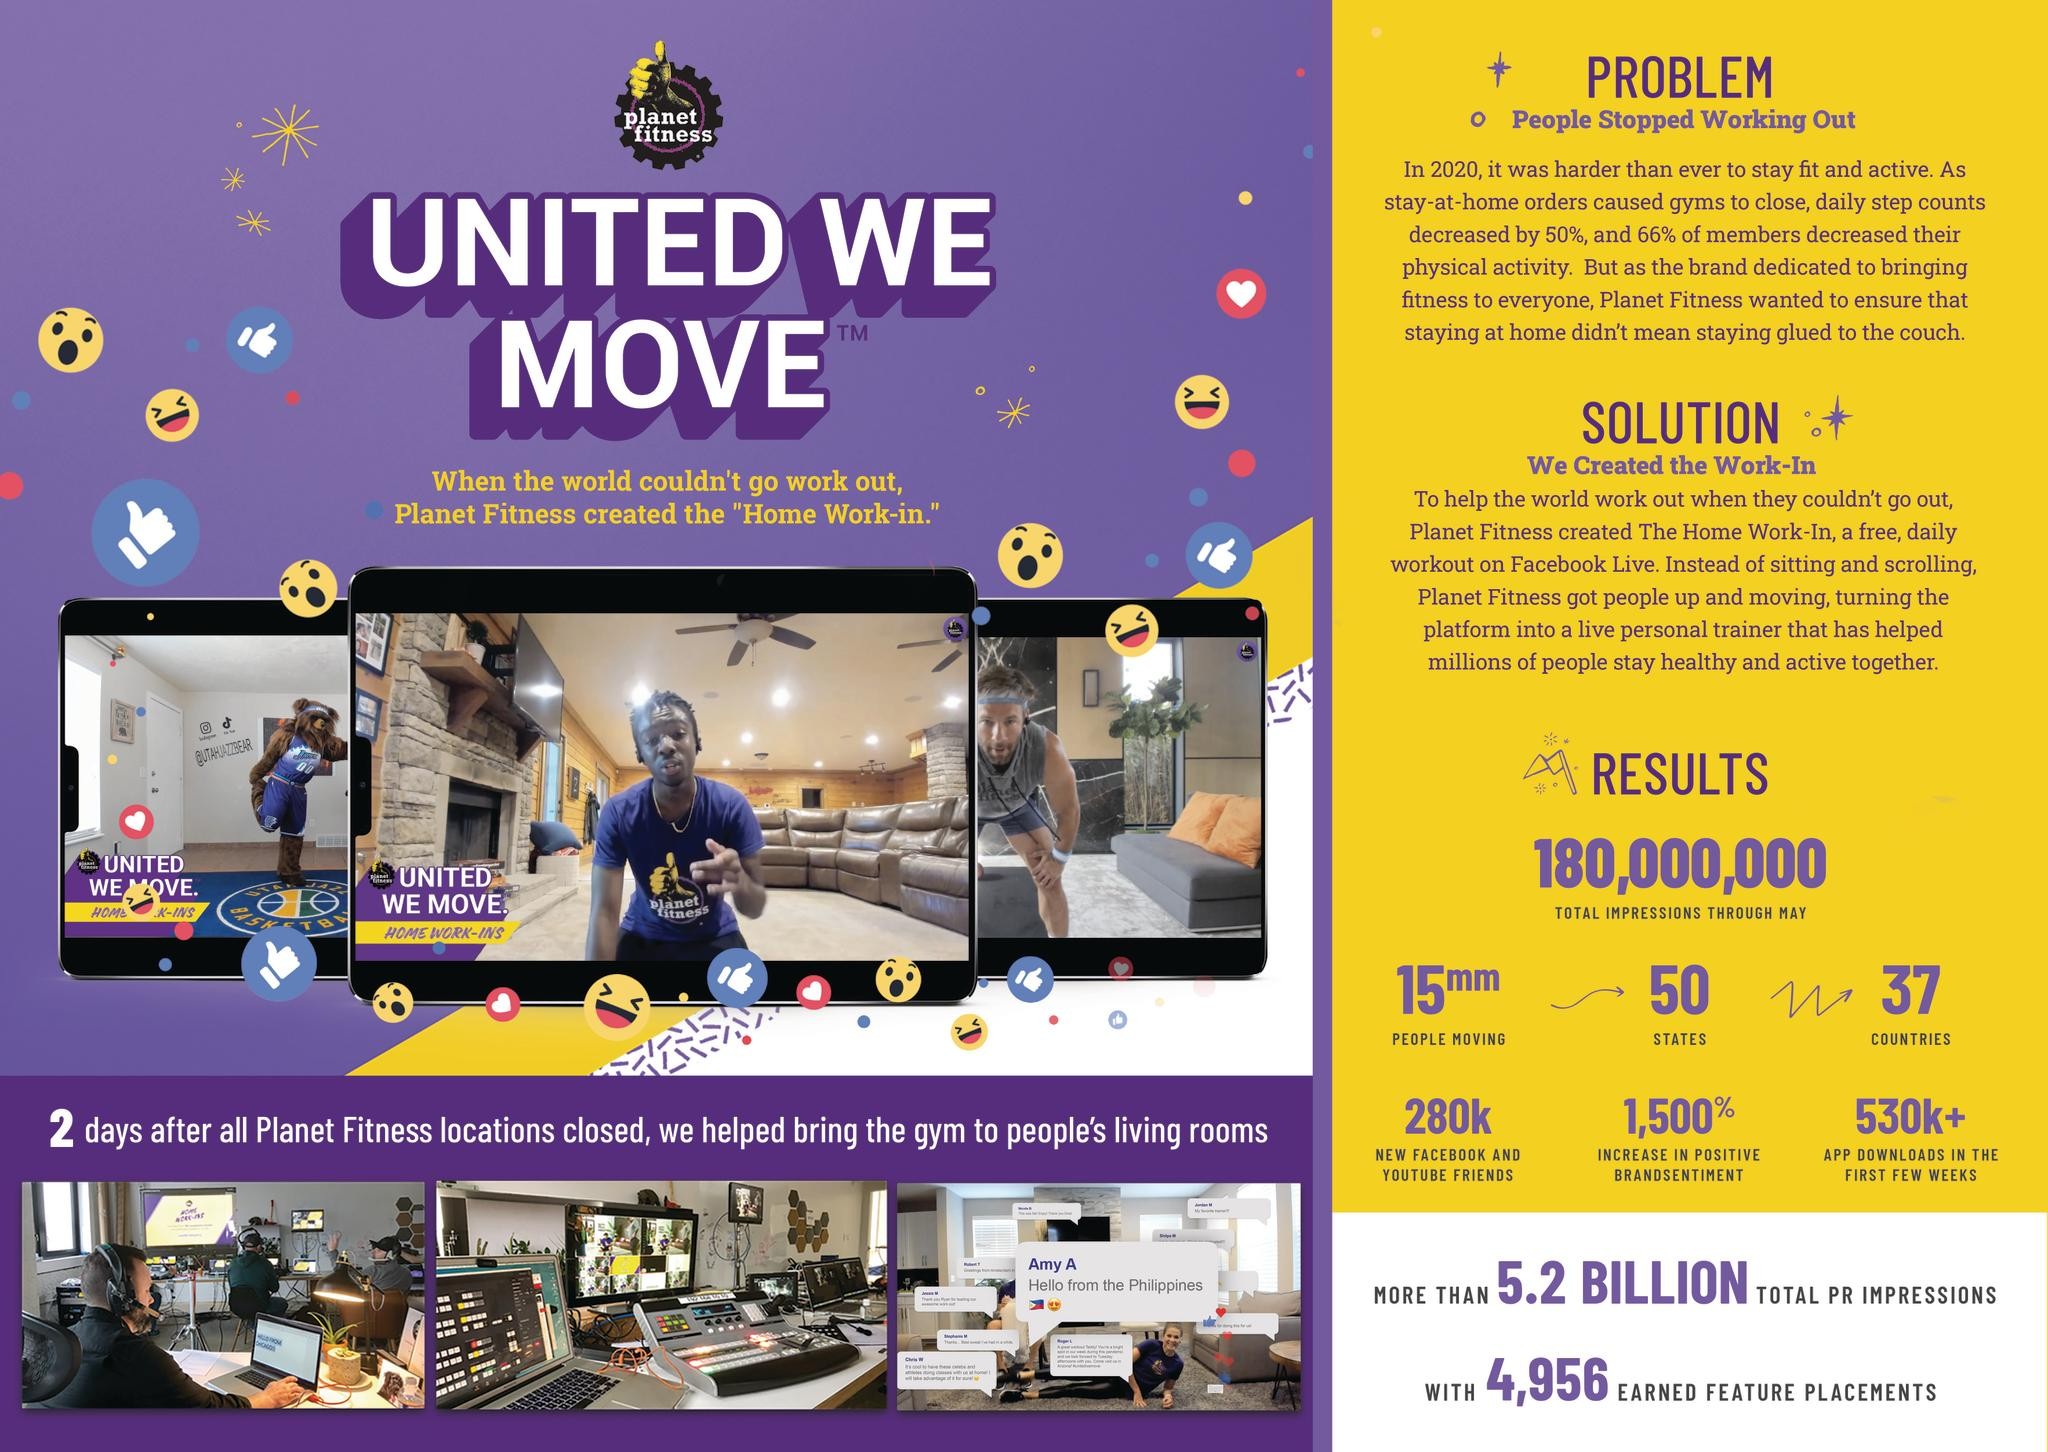 United We Move: Working “In” with Planet Fitness